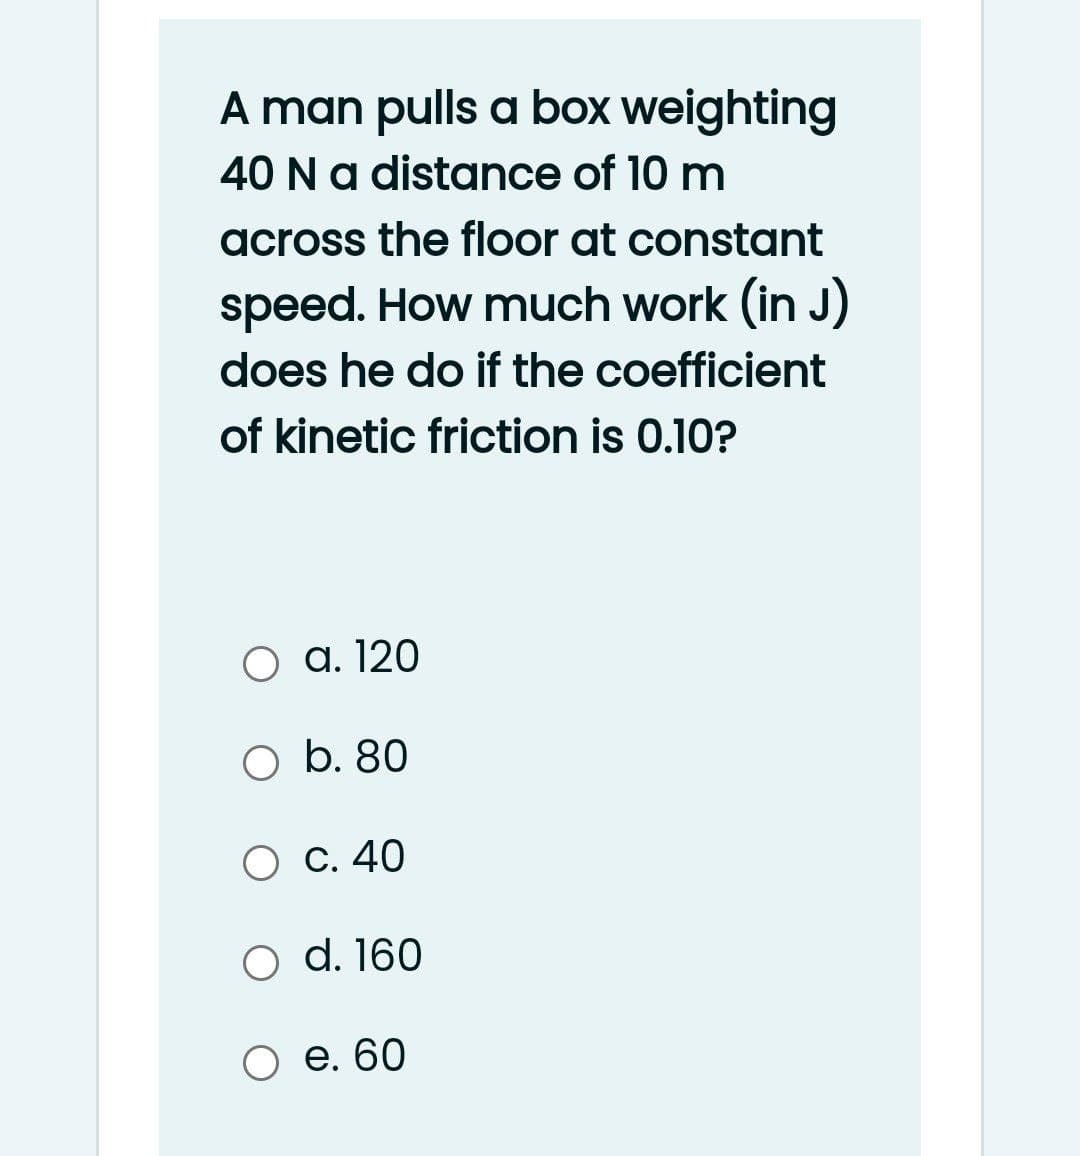 A man pulls a box weighting
40 Na distance of 10 m
across the floor at constant
speed. How much work (in J)
does he do if the coefficient
of kinetic friction is 0.10?
O a. 120
O b. 80
С. 40
d. 160
Ое. 60
